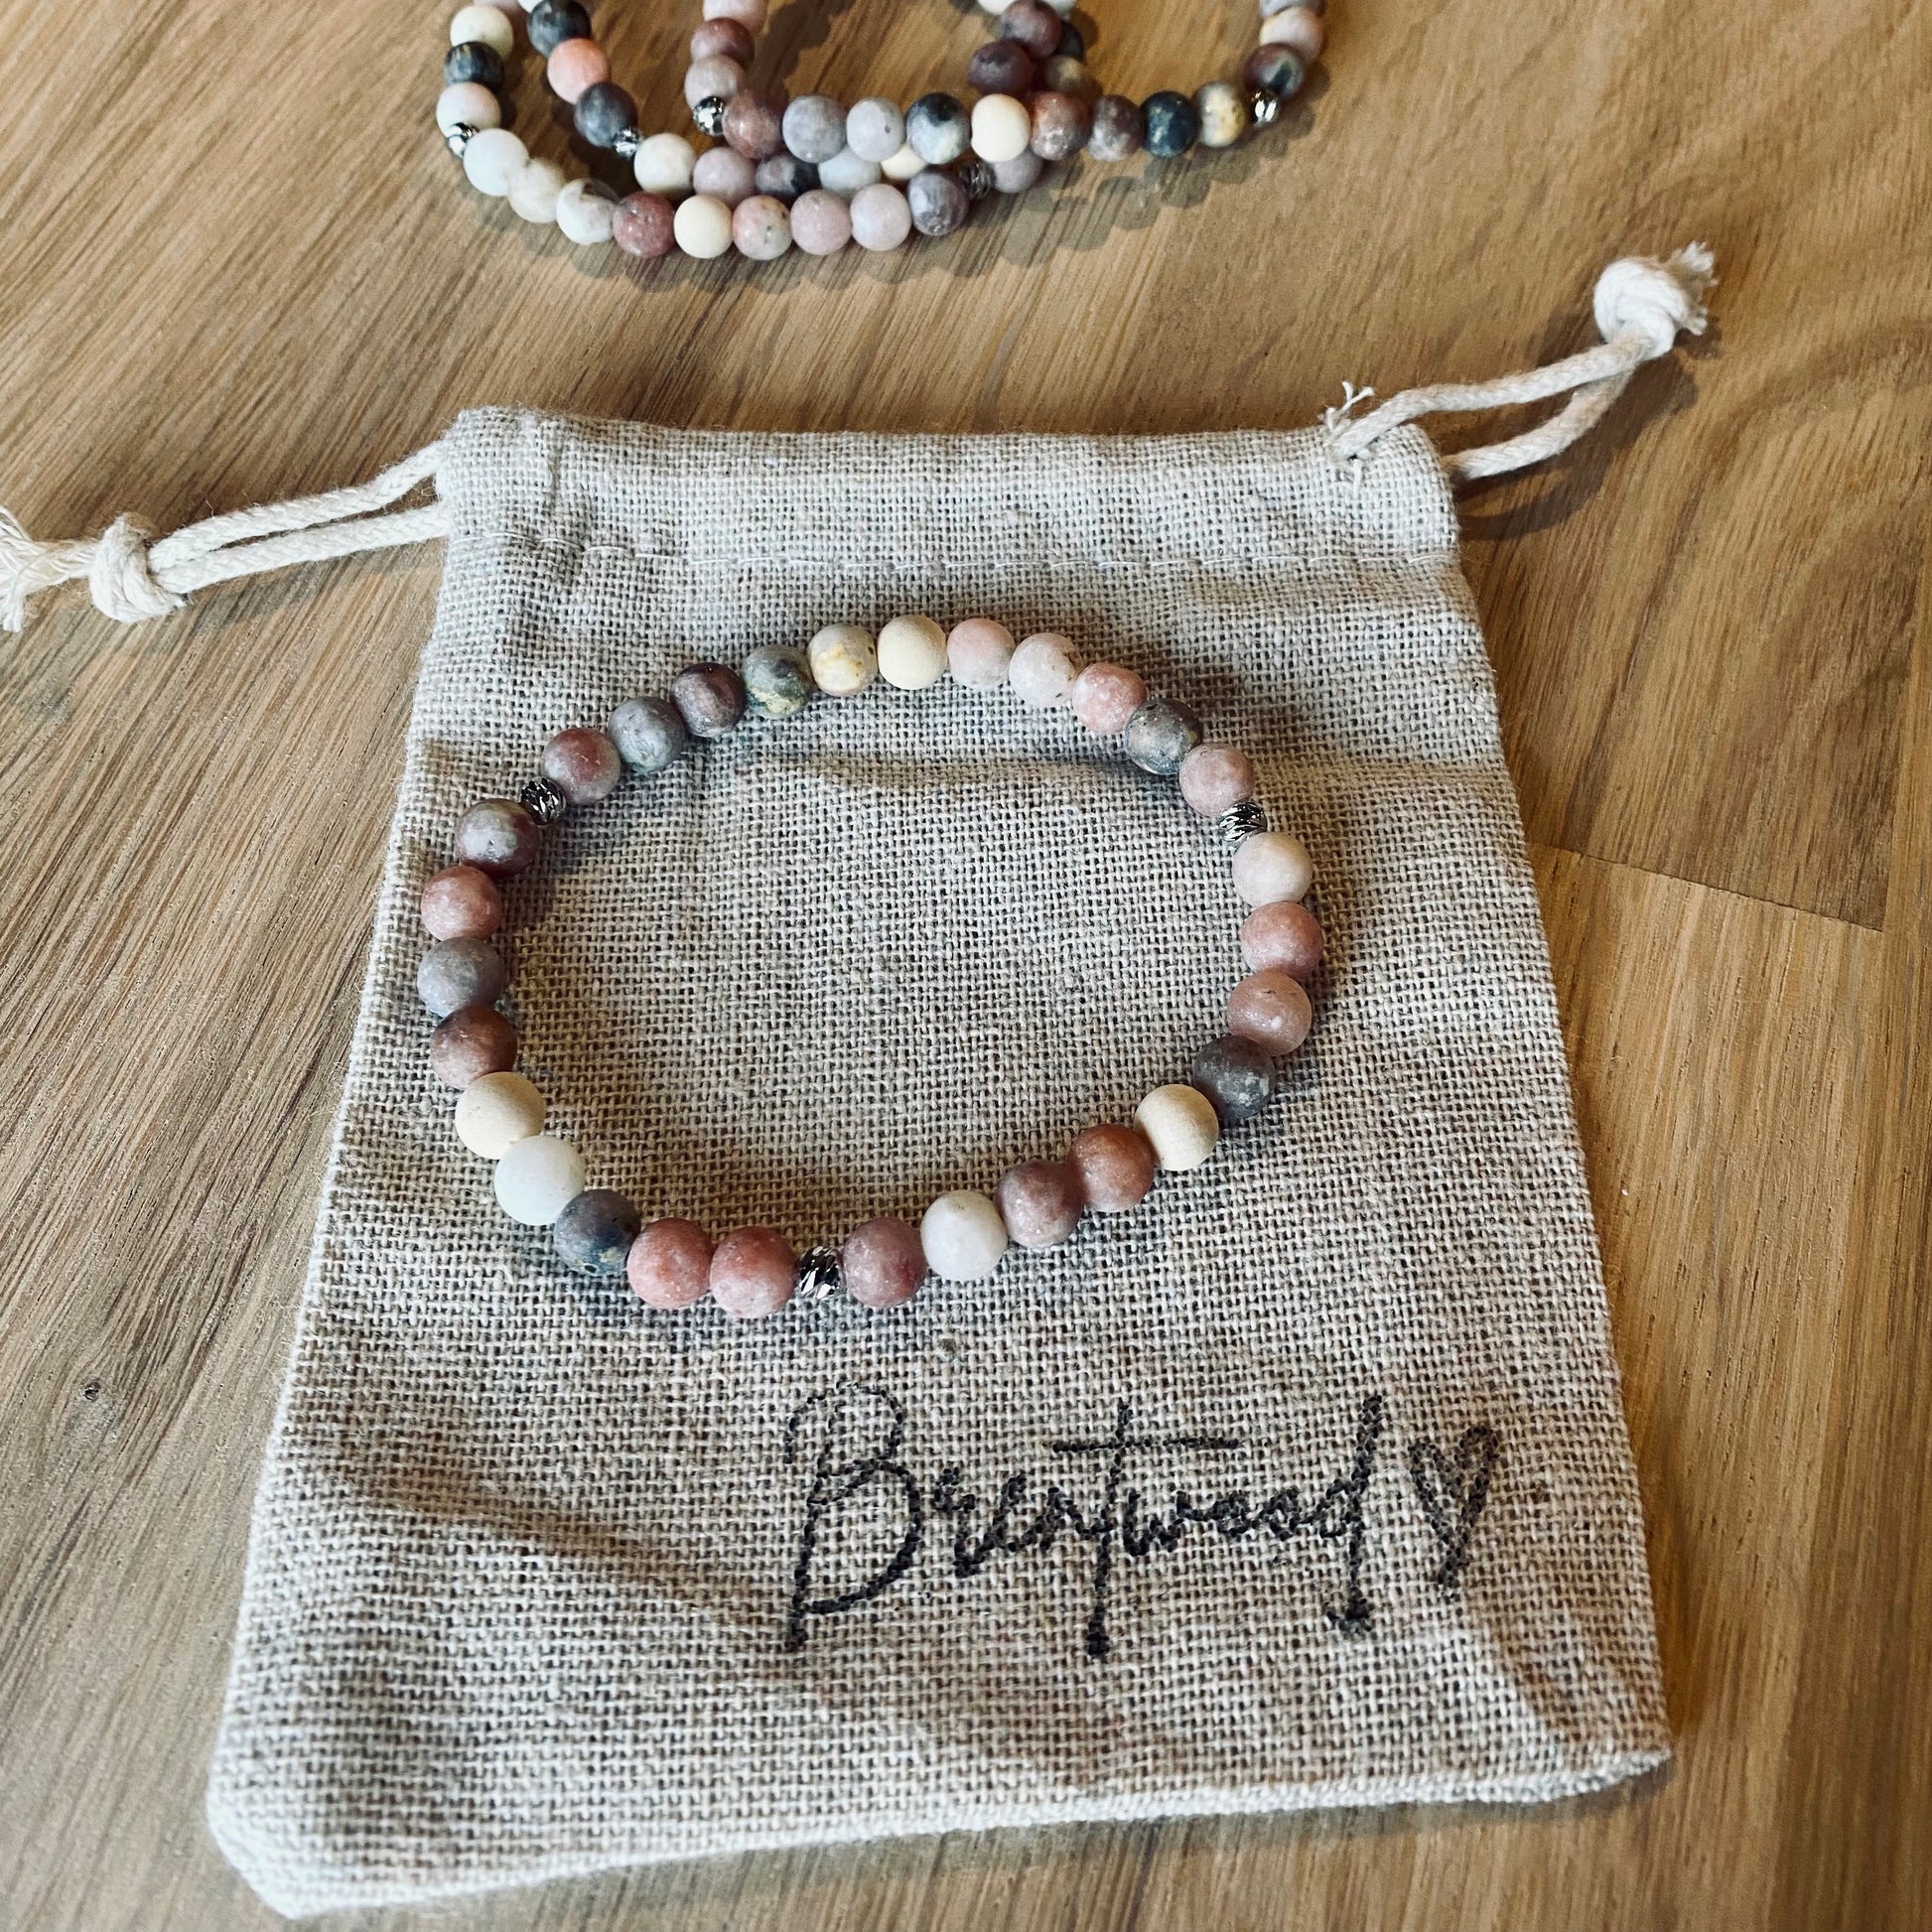 Mixed Marble Aroma Bracelet - 6mm beaded diffuser bracelet made from mixed marble & natural white wooden beads with platinum plated balls as embellishments. Laid on cloth pouch/drawstring bag stamped with “Brentwood” and a heart.